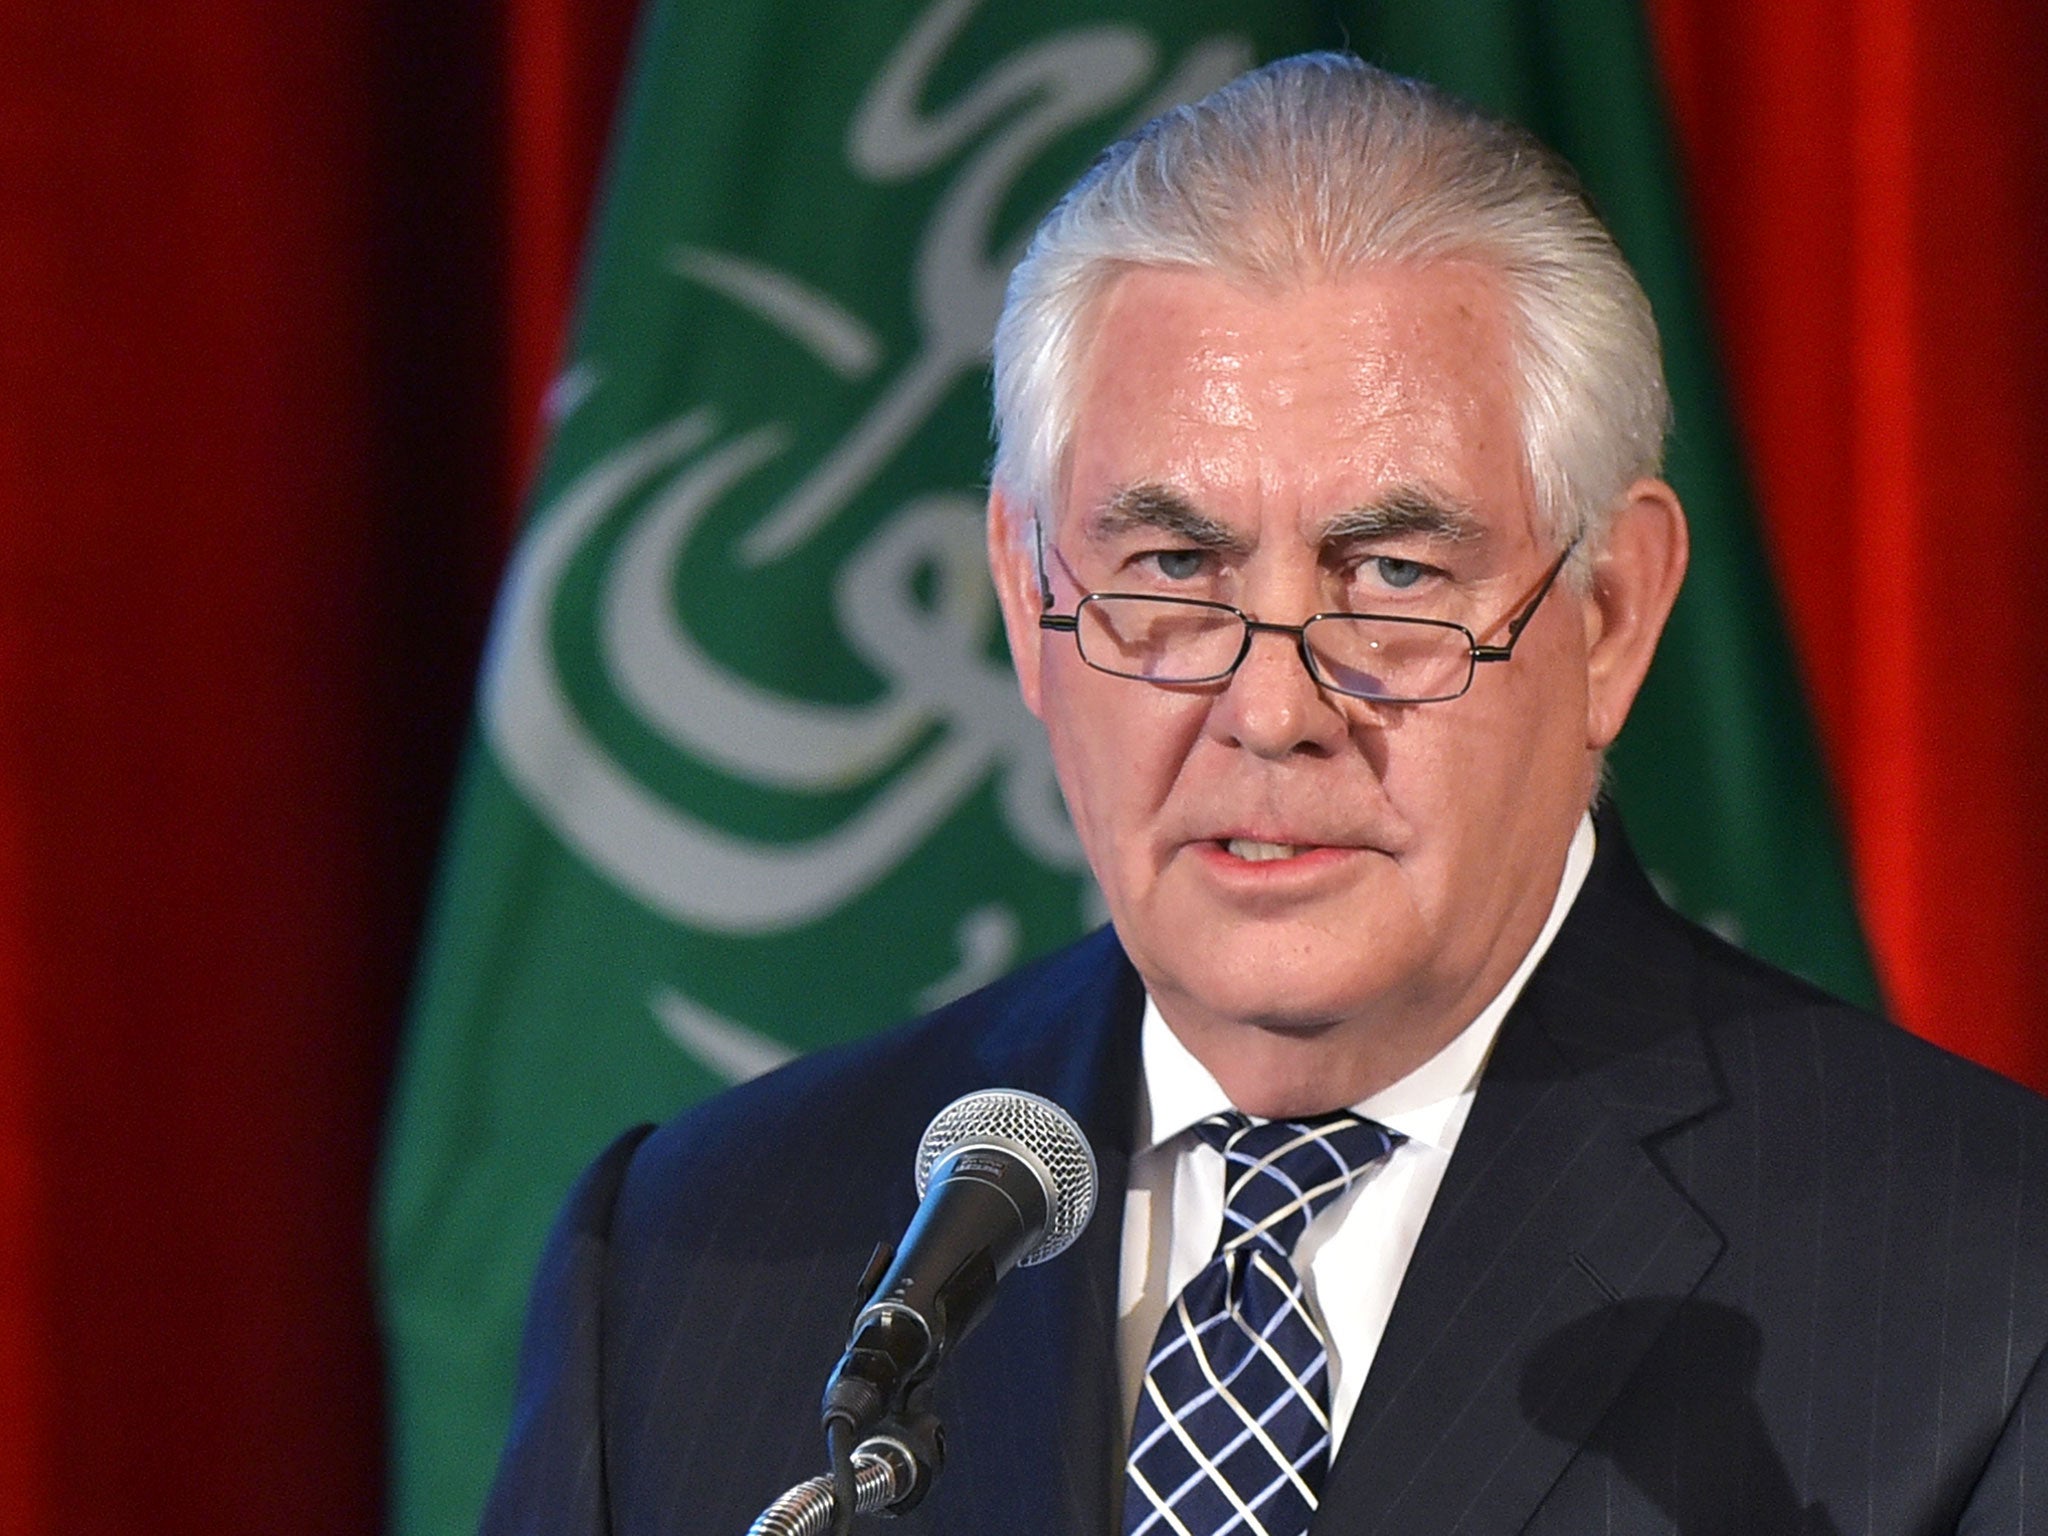 US Secretary of State Rex Tillerson delivers the opening address at the US Chamber of Commerce's US-Saudi CEO Summit in Washington last month